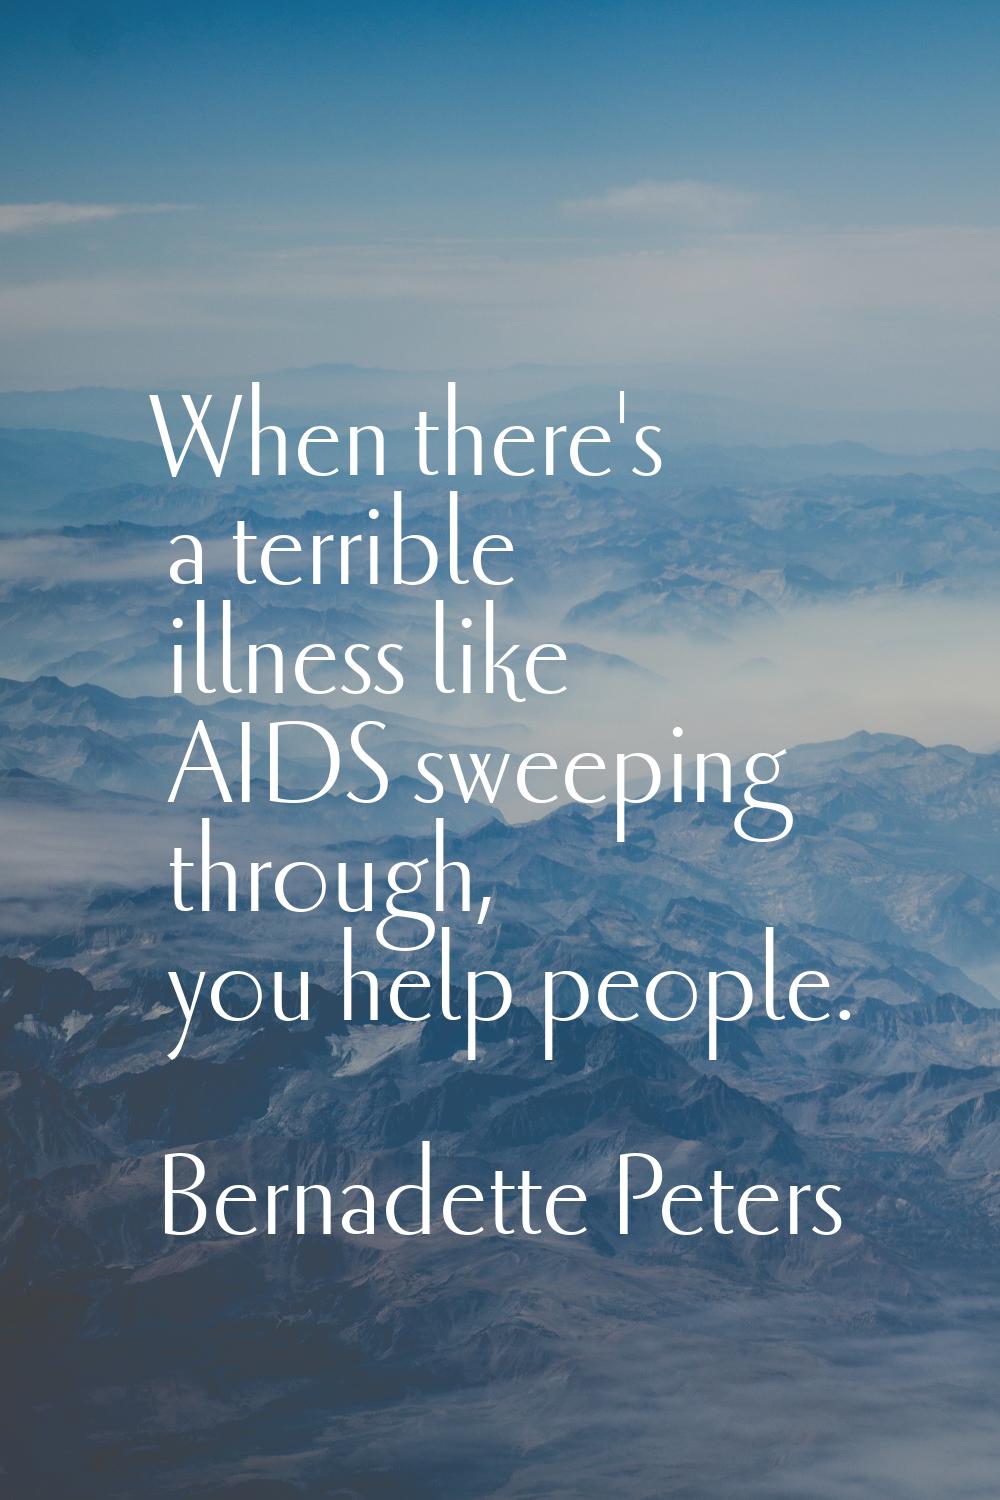 When there's a terrible illness like AIDS sweeping through, you help people.